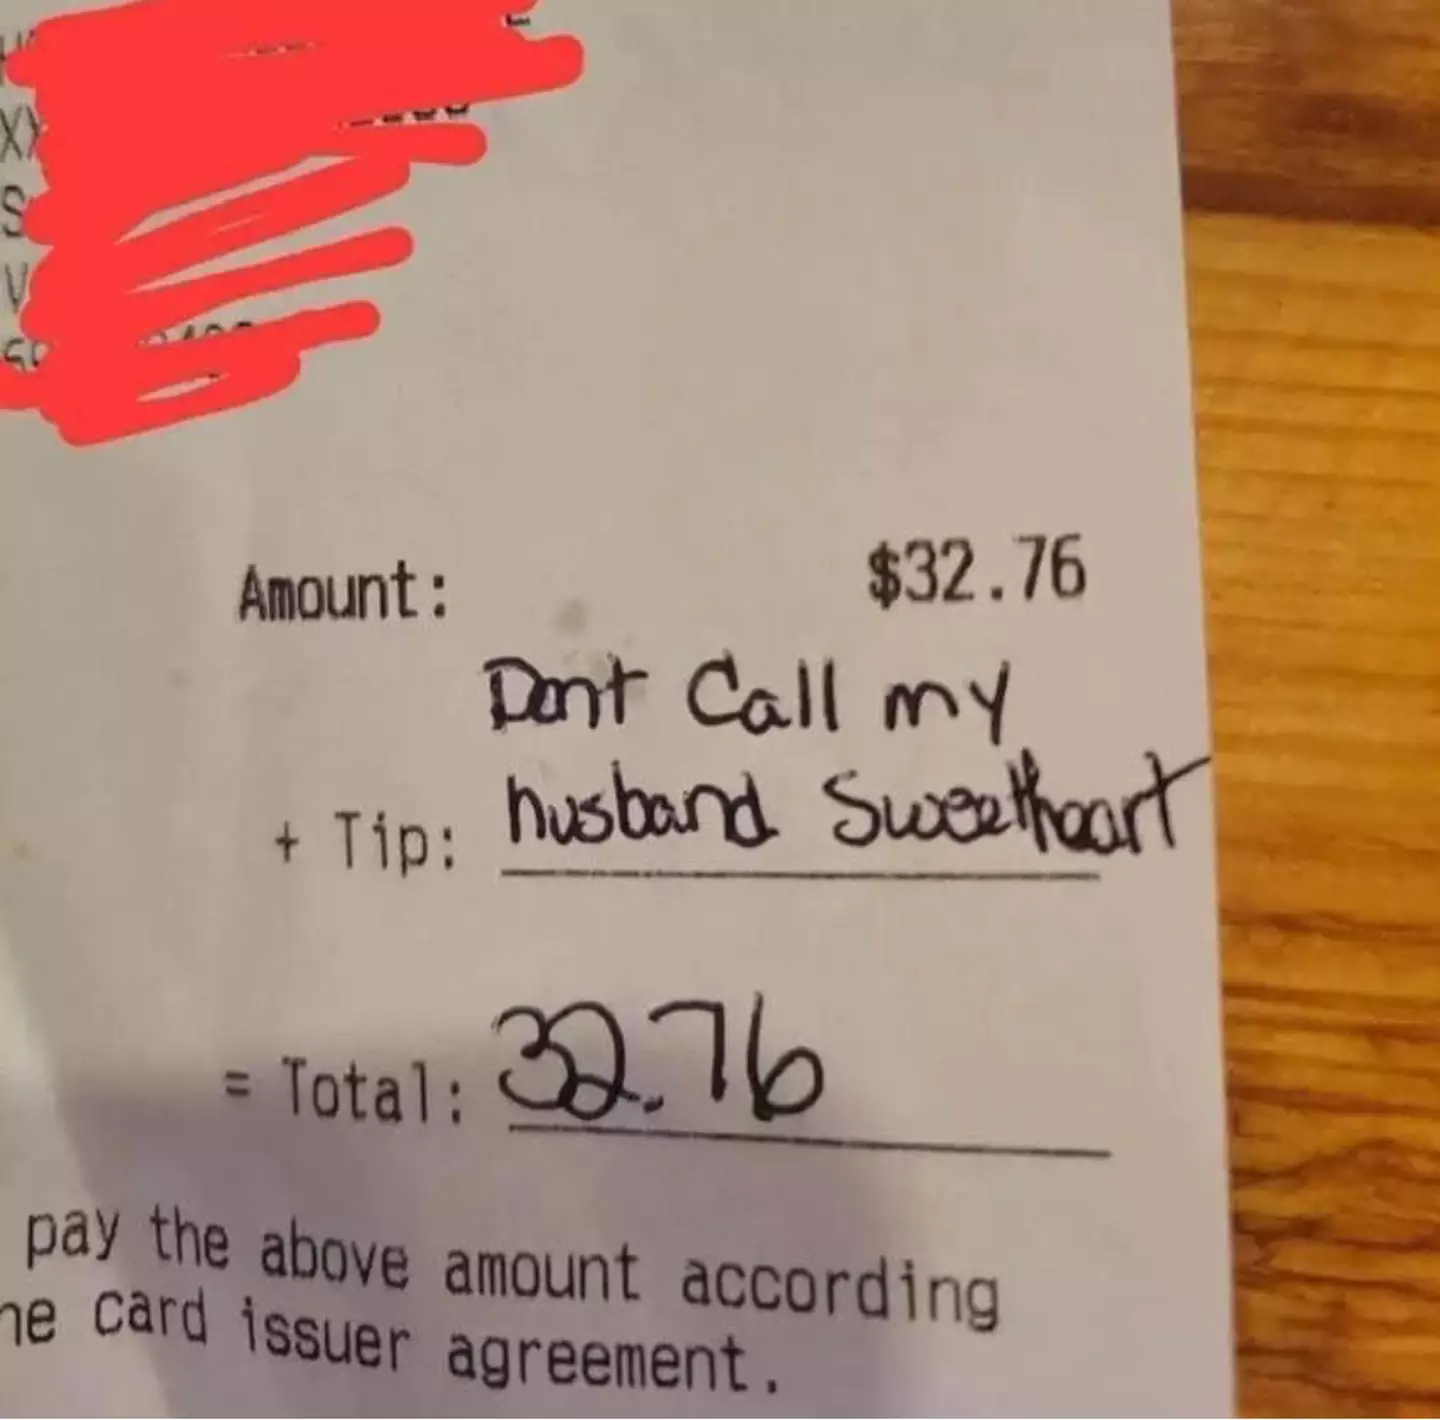 The wife left a savage message on the bill.